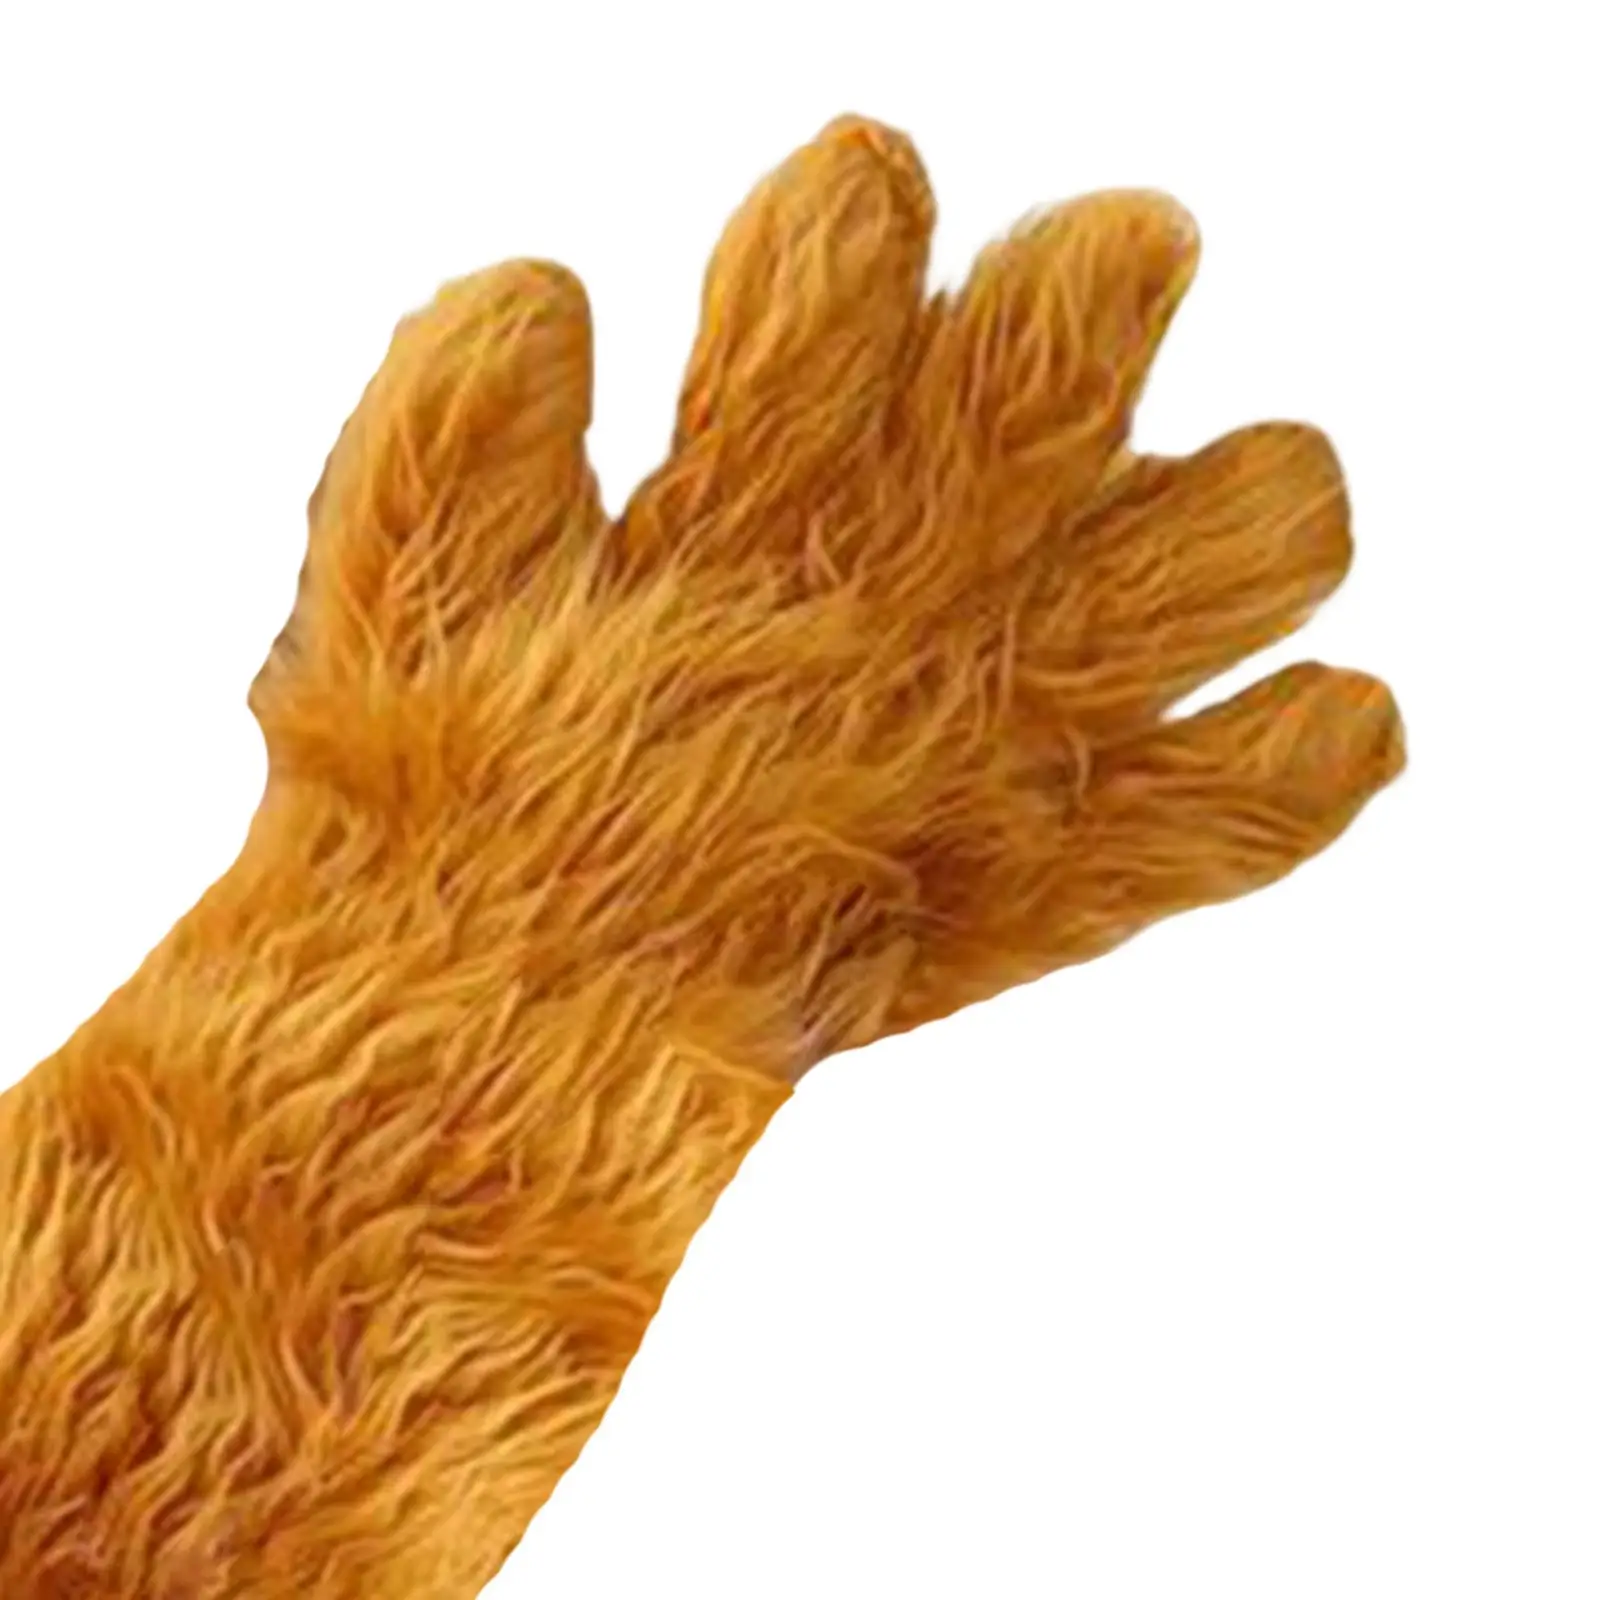 Plush Long Paw Gloves Costume Fancy Dress Adult Cosplay Gift Decoration for Festival Carnival Masquerade Party Halloween